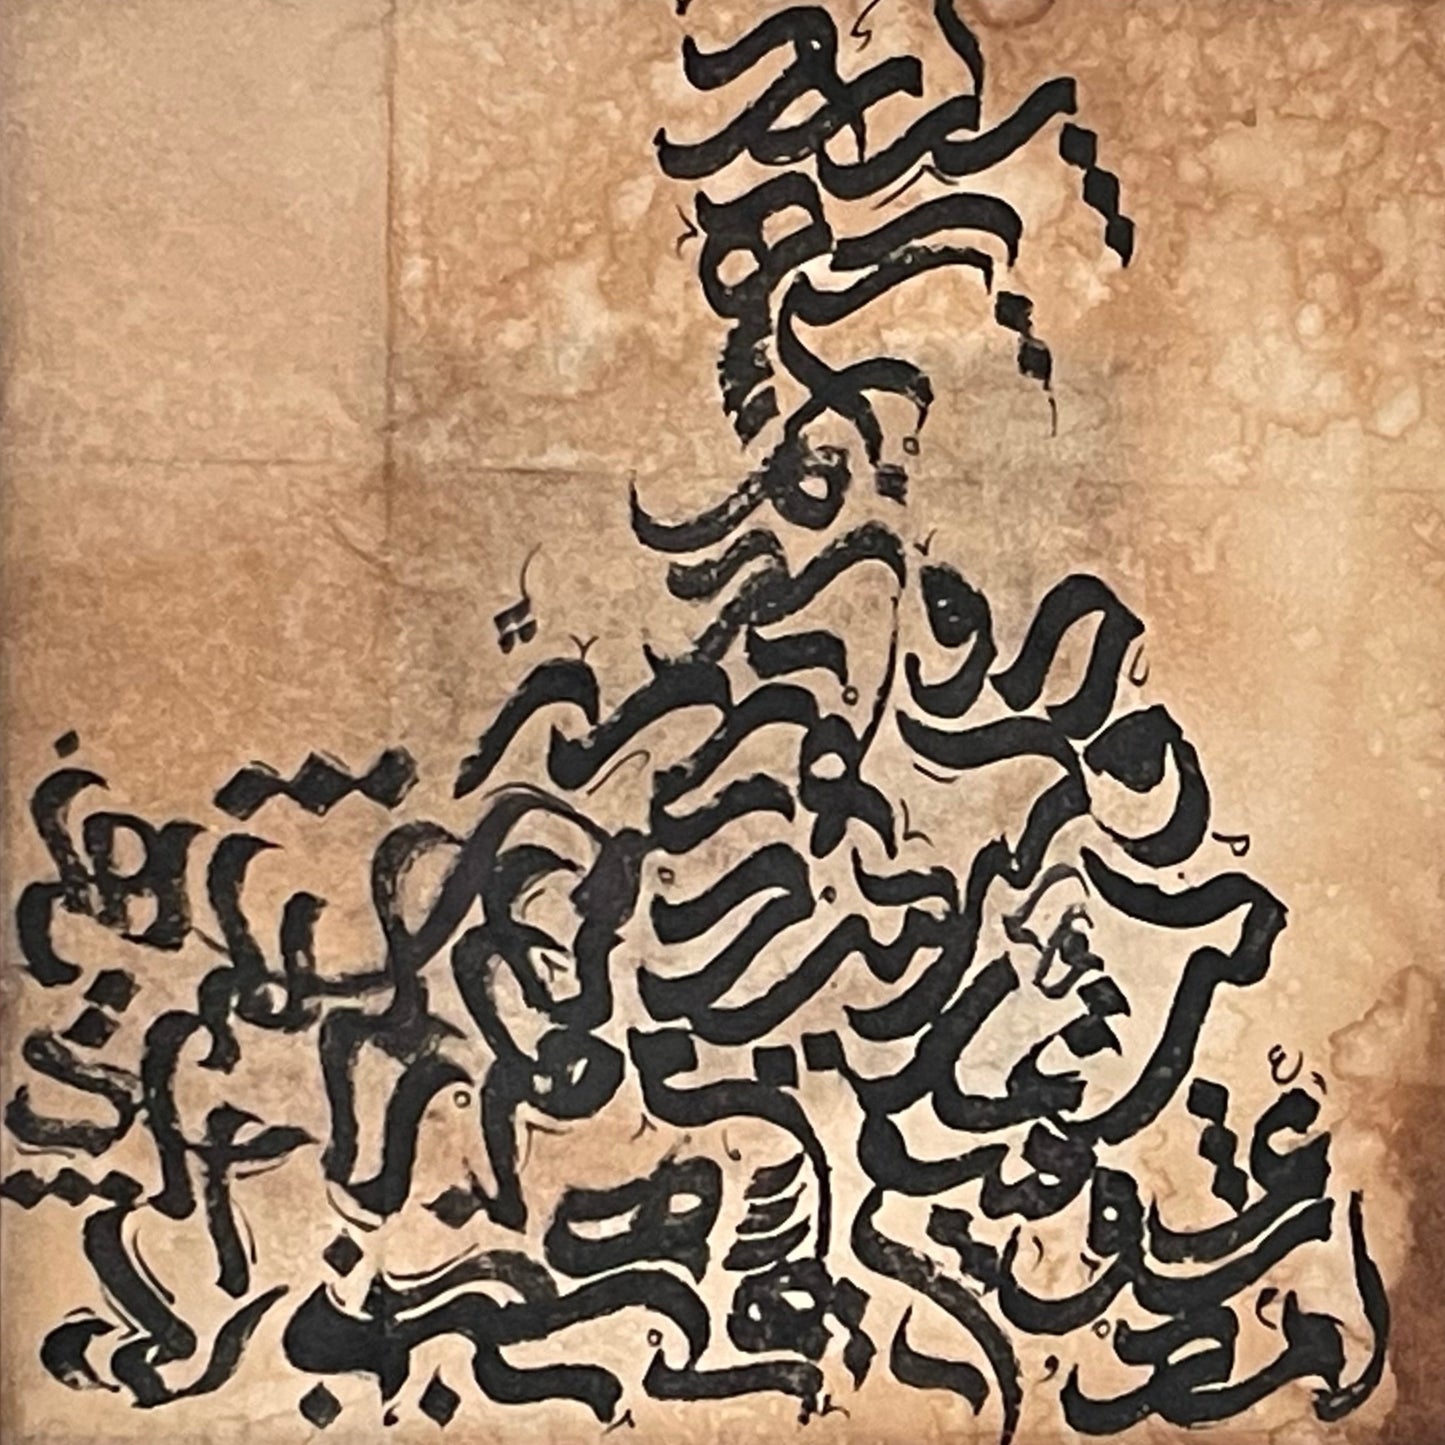 Modern Persian Calligraphy [Mid-City]